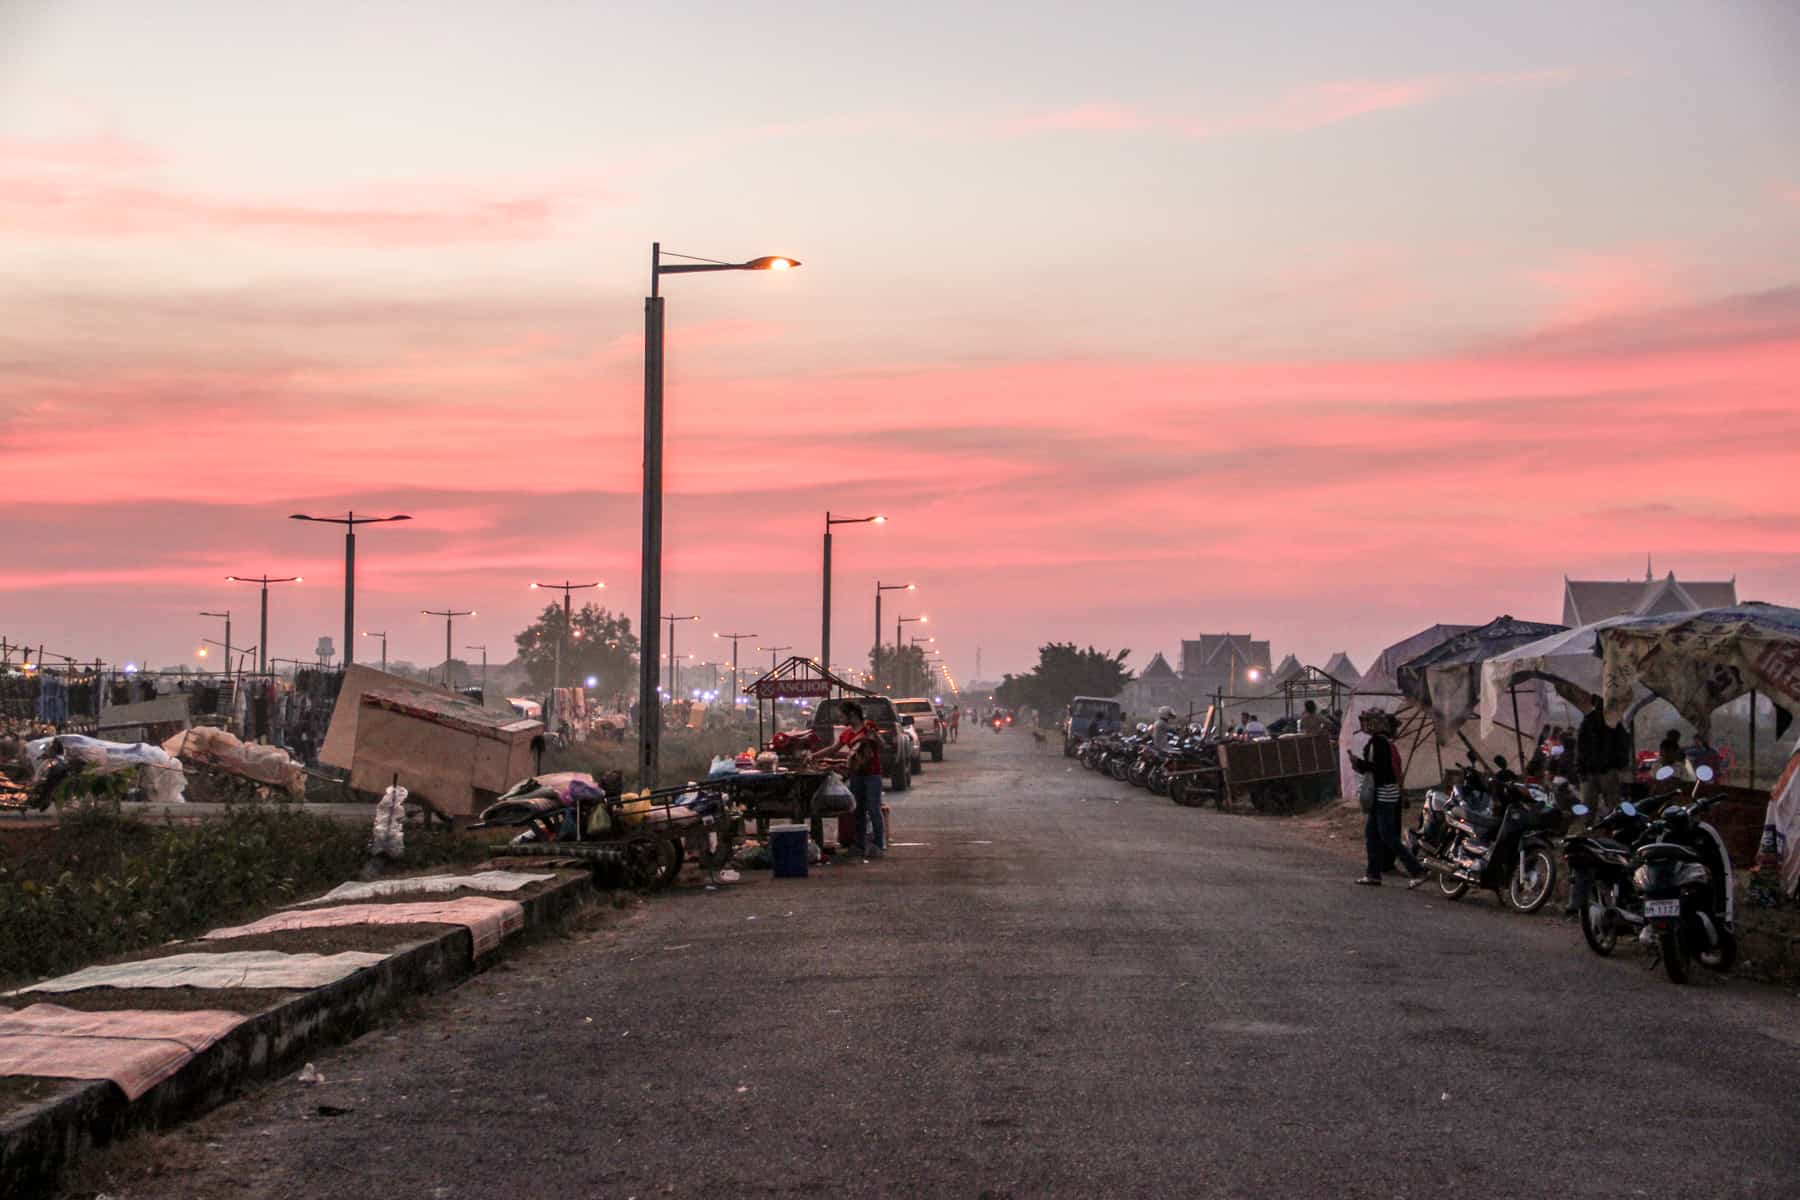 60 Road Siem Reap – A long street lined with blankets, street food carts, motorbikes and makeshift tents under a dusky pink sky in Siem Reap, Cambodia